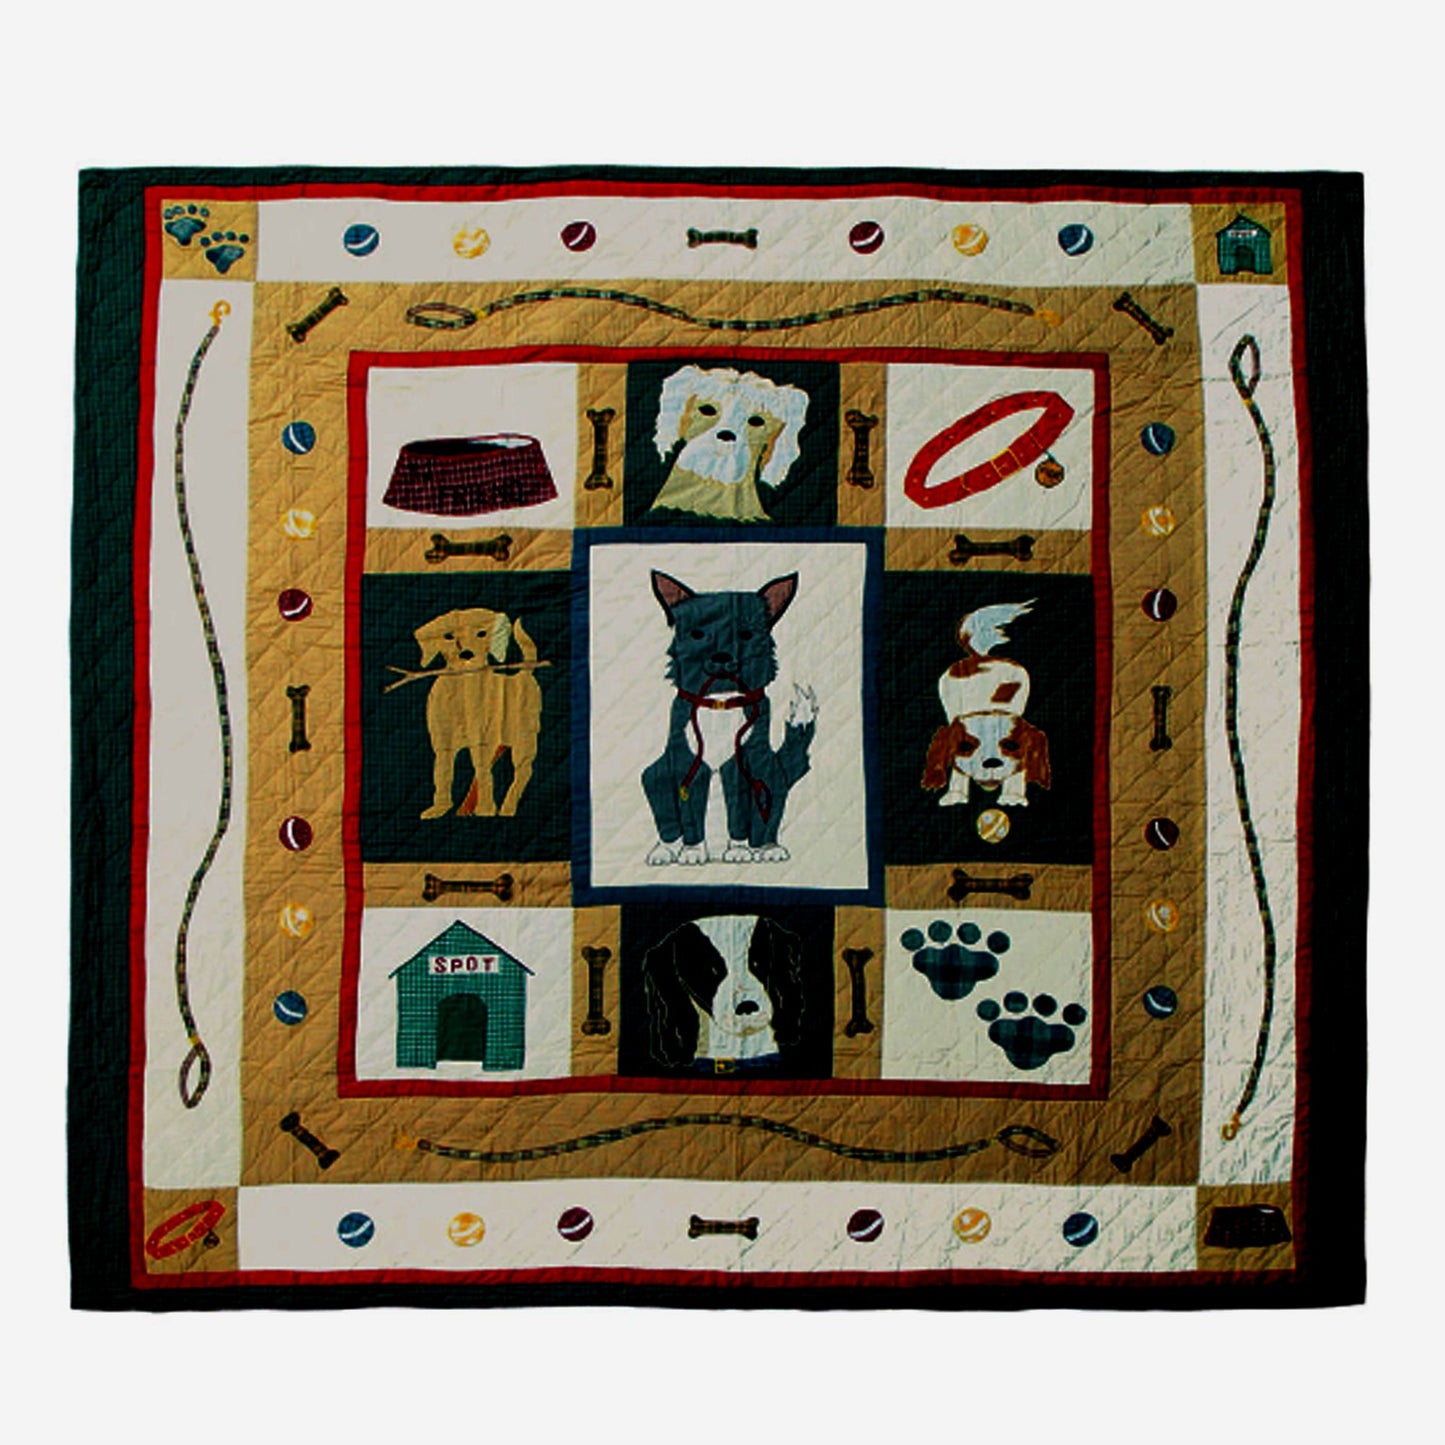 Cheeky Pet/ Fido/ Dog Twin (65"Wx85"L) Cotton Quilt, Hand cut and Appliqued cotton fabric motifs